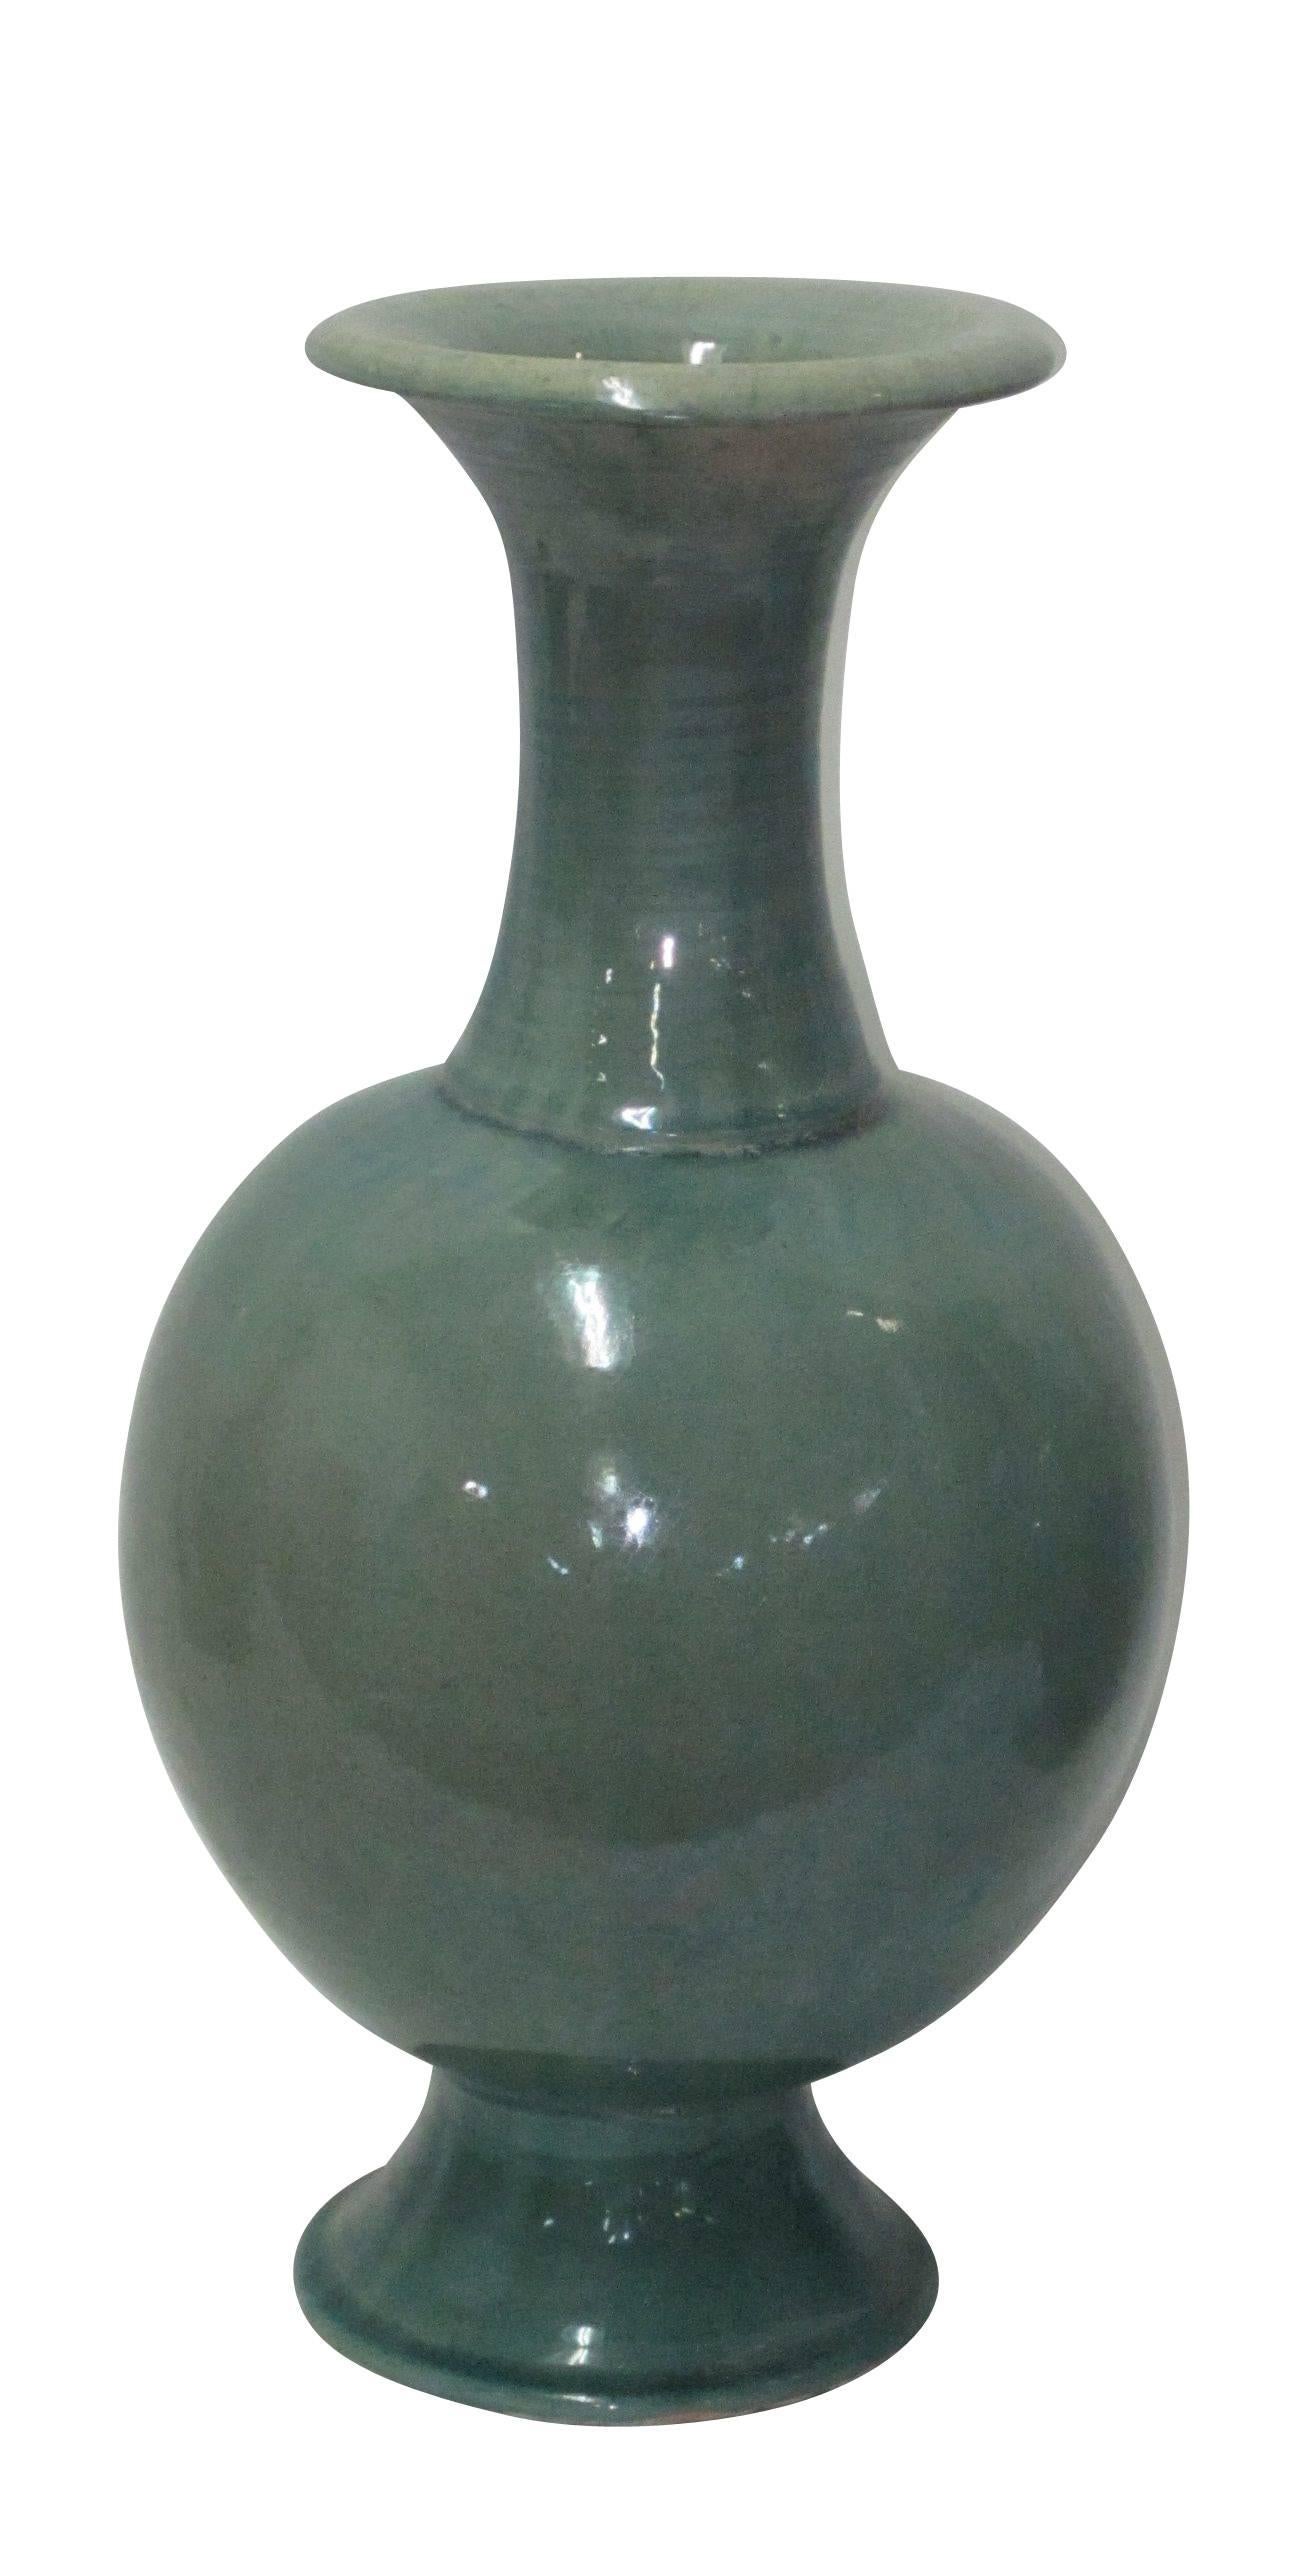 Contemporary Chinese assortment of extra large vases.
The turquoise glaze gives a washed effect.
An assortment of styles and sizes ranging from 8 inch to 13 inch diameter x 11 inch to 16 inch height.
Vases are priced individually.
Beautiful